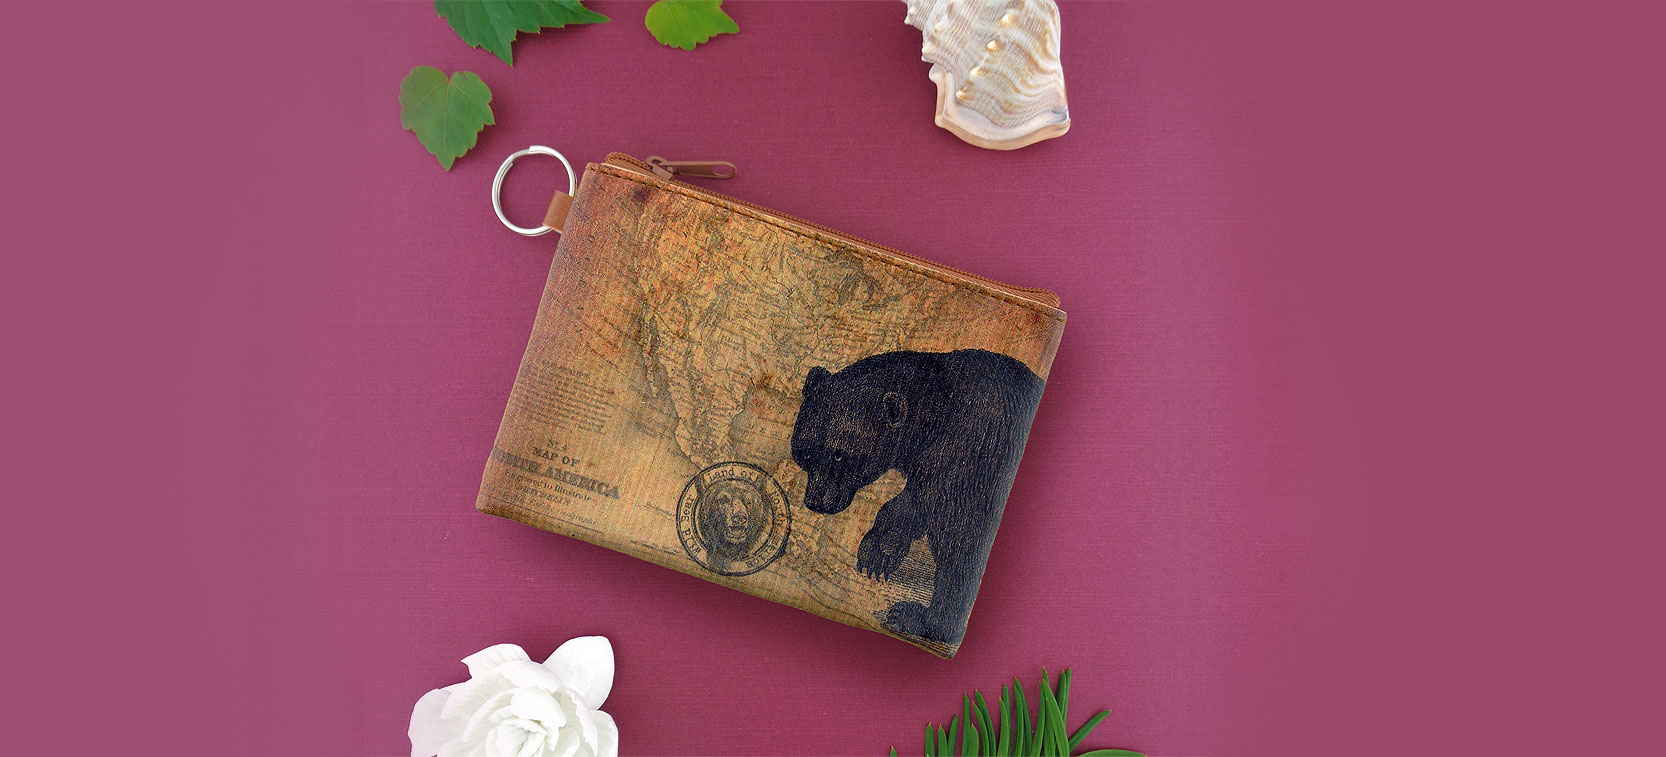 LAVISHY design & wholesale bear themed vegan accessories & gfits to gift shops, boutiques & book shops, souvenir stores in Canada, USA & worldwide.